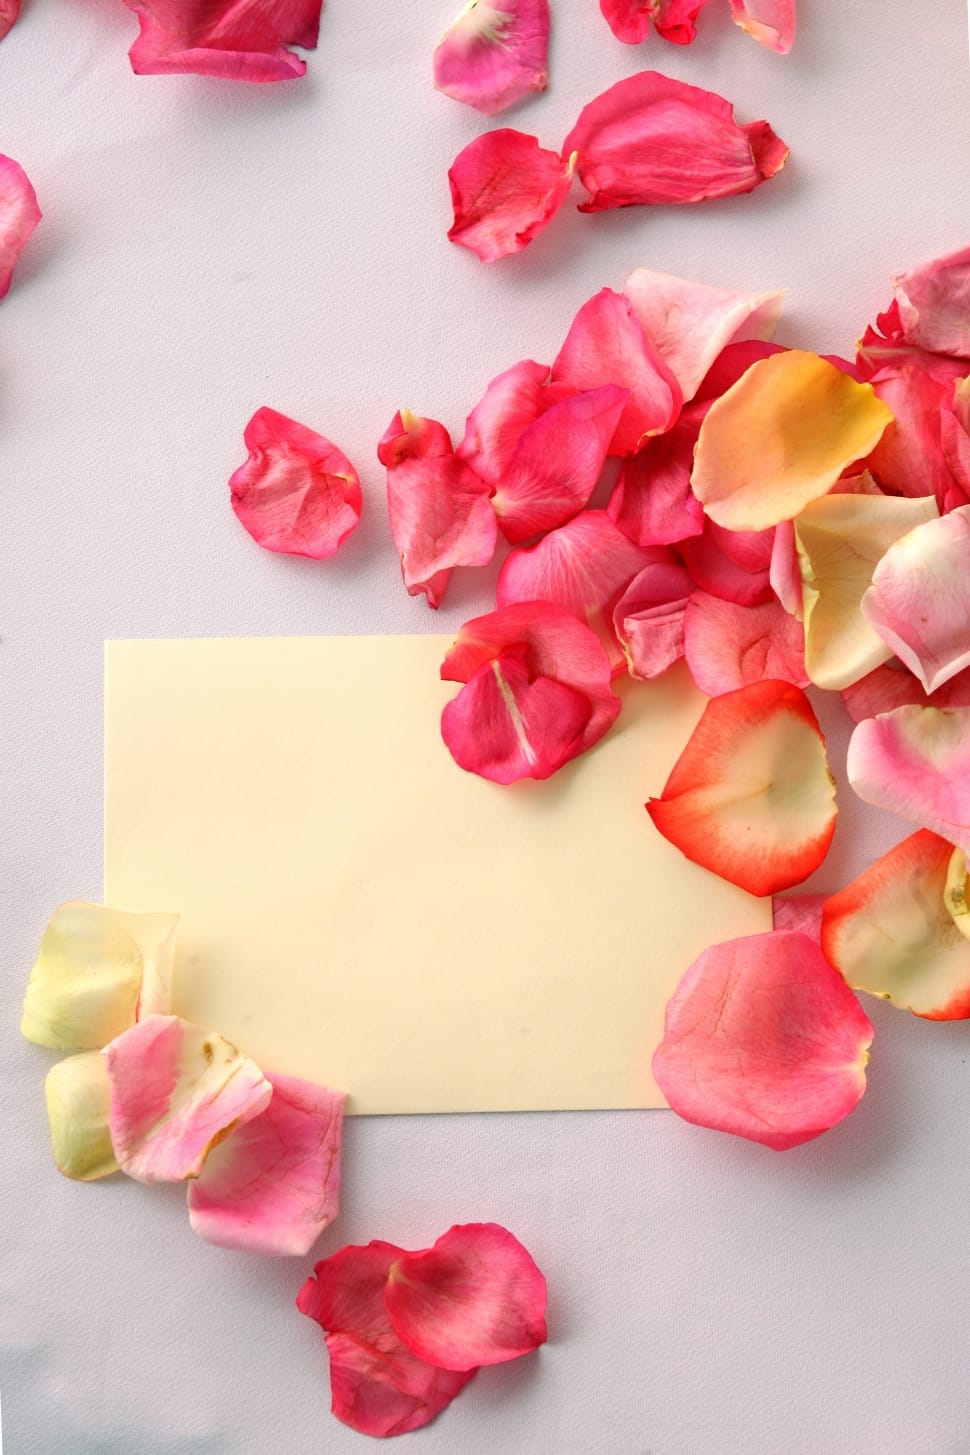 yellow and pink flower petals preview